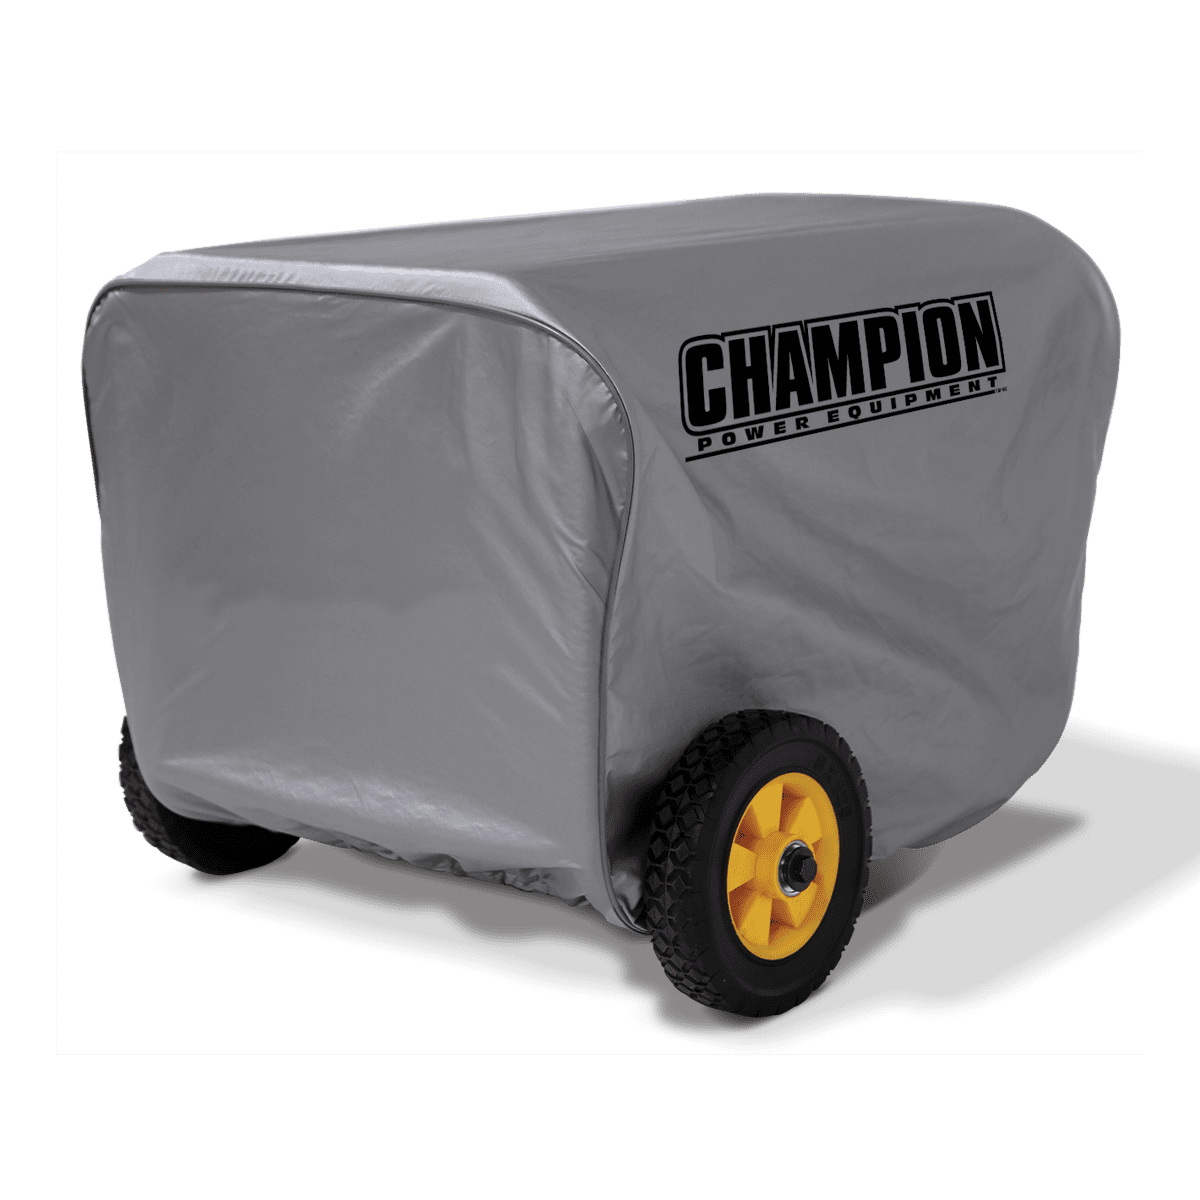 Dust Proof Generator Cover Fit For Duromax Xplgc Models Xp6500e Xp8500e Xp10000e Accessories power tools 